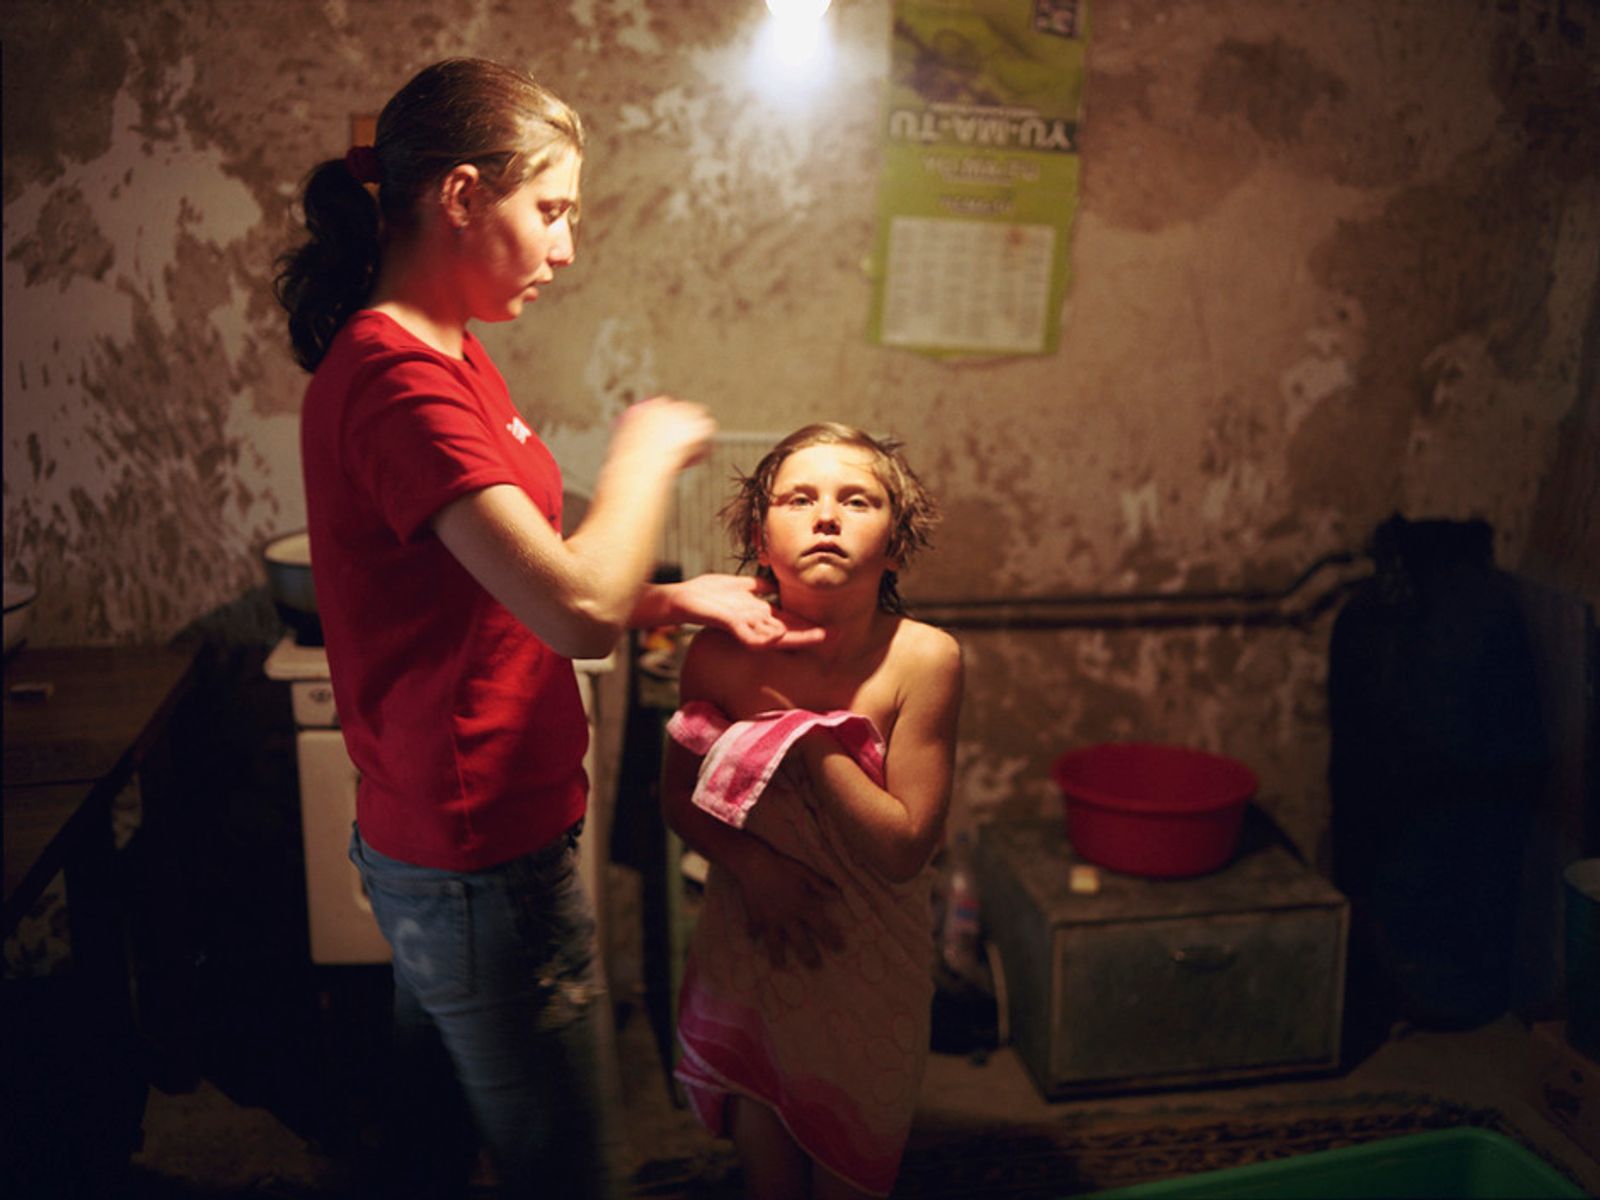 © Andrea Diefenbach - Marina is taking care of her sister Gabi. Their mother lives and works in Italy, the father often works in Russia.